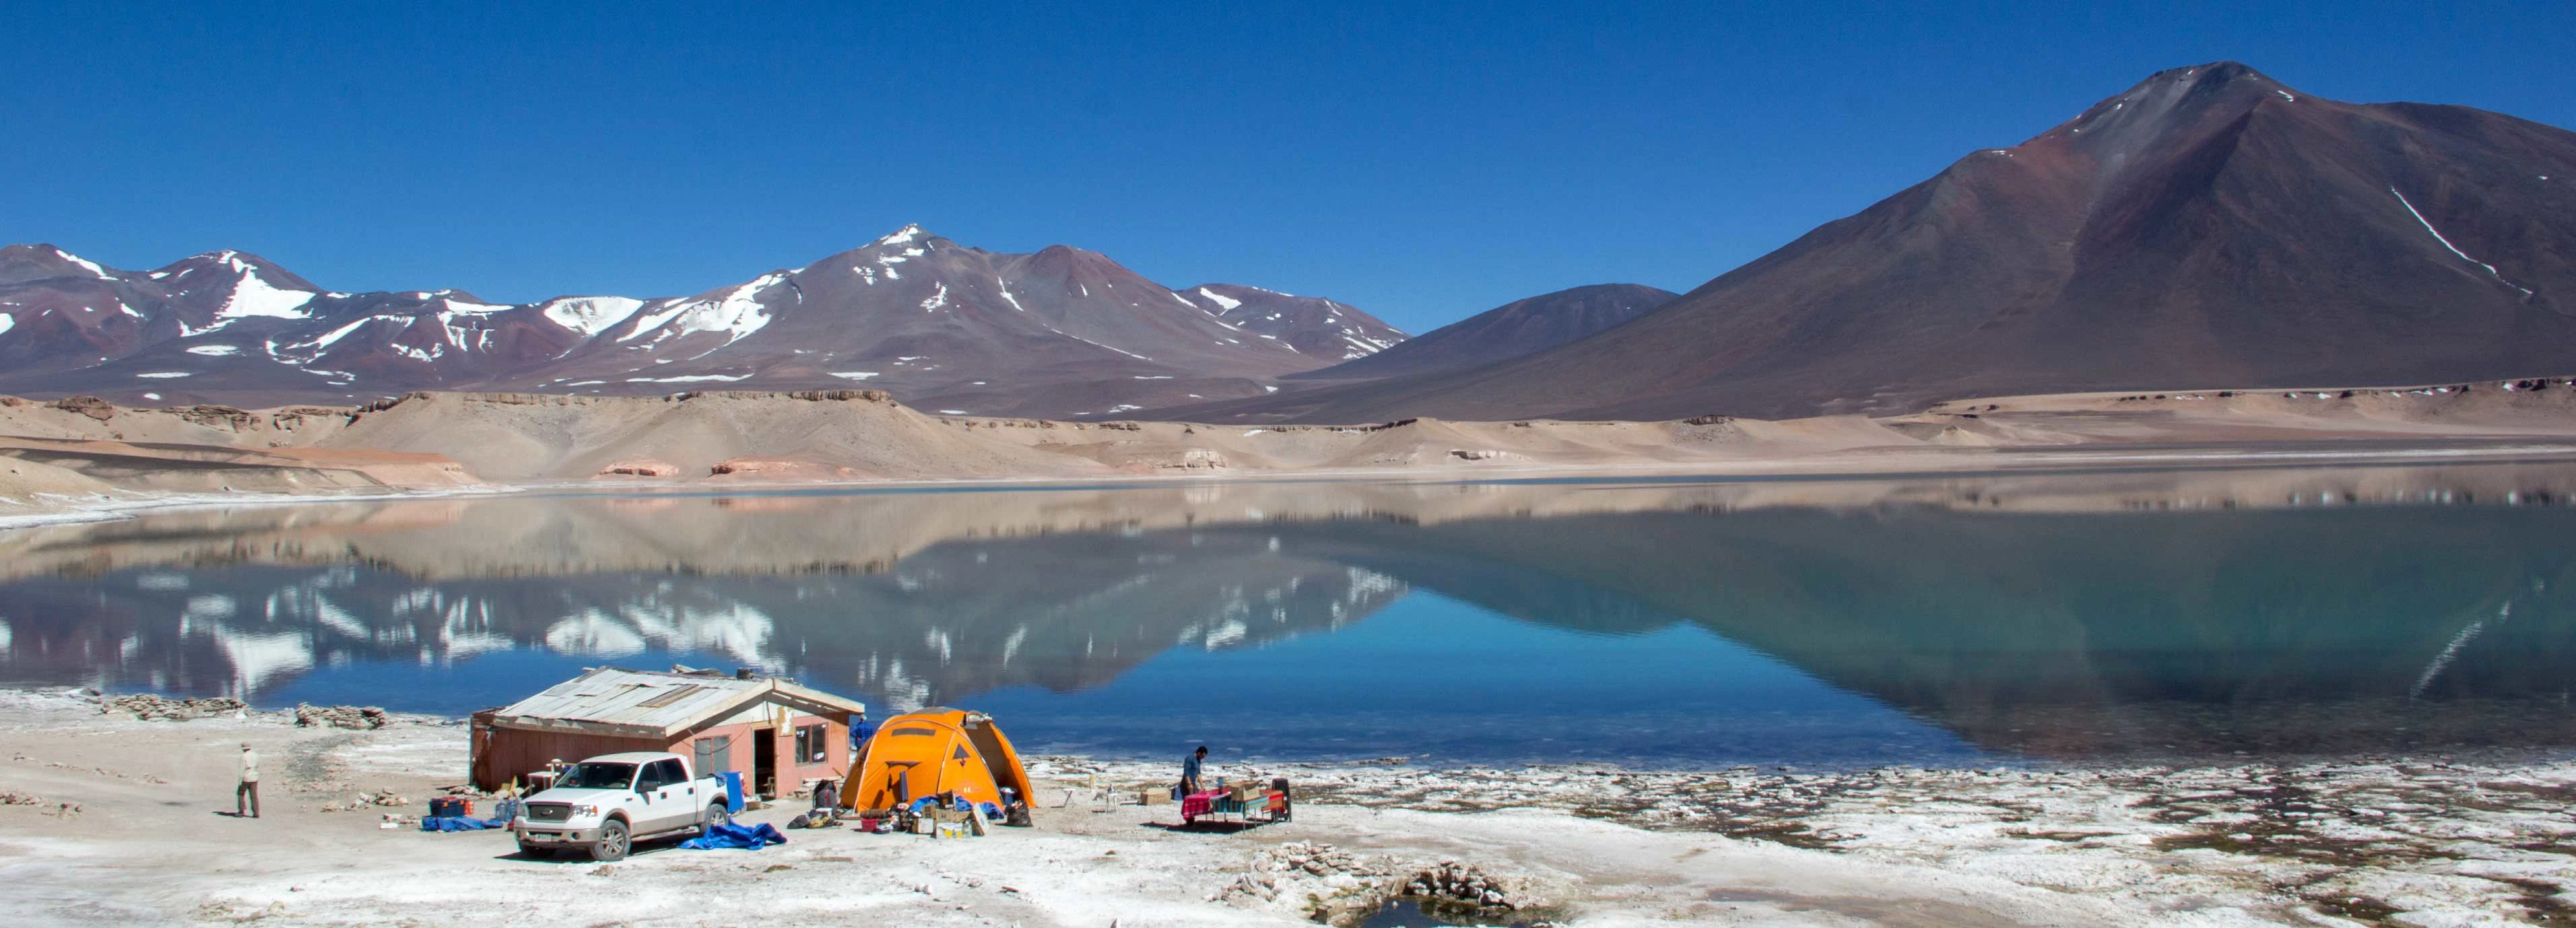 base camp near a lagoon in the altiplano